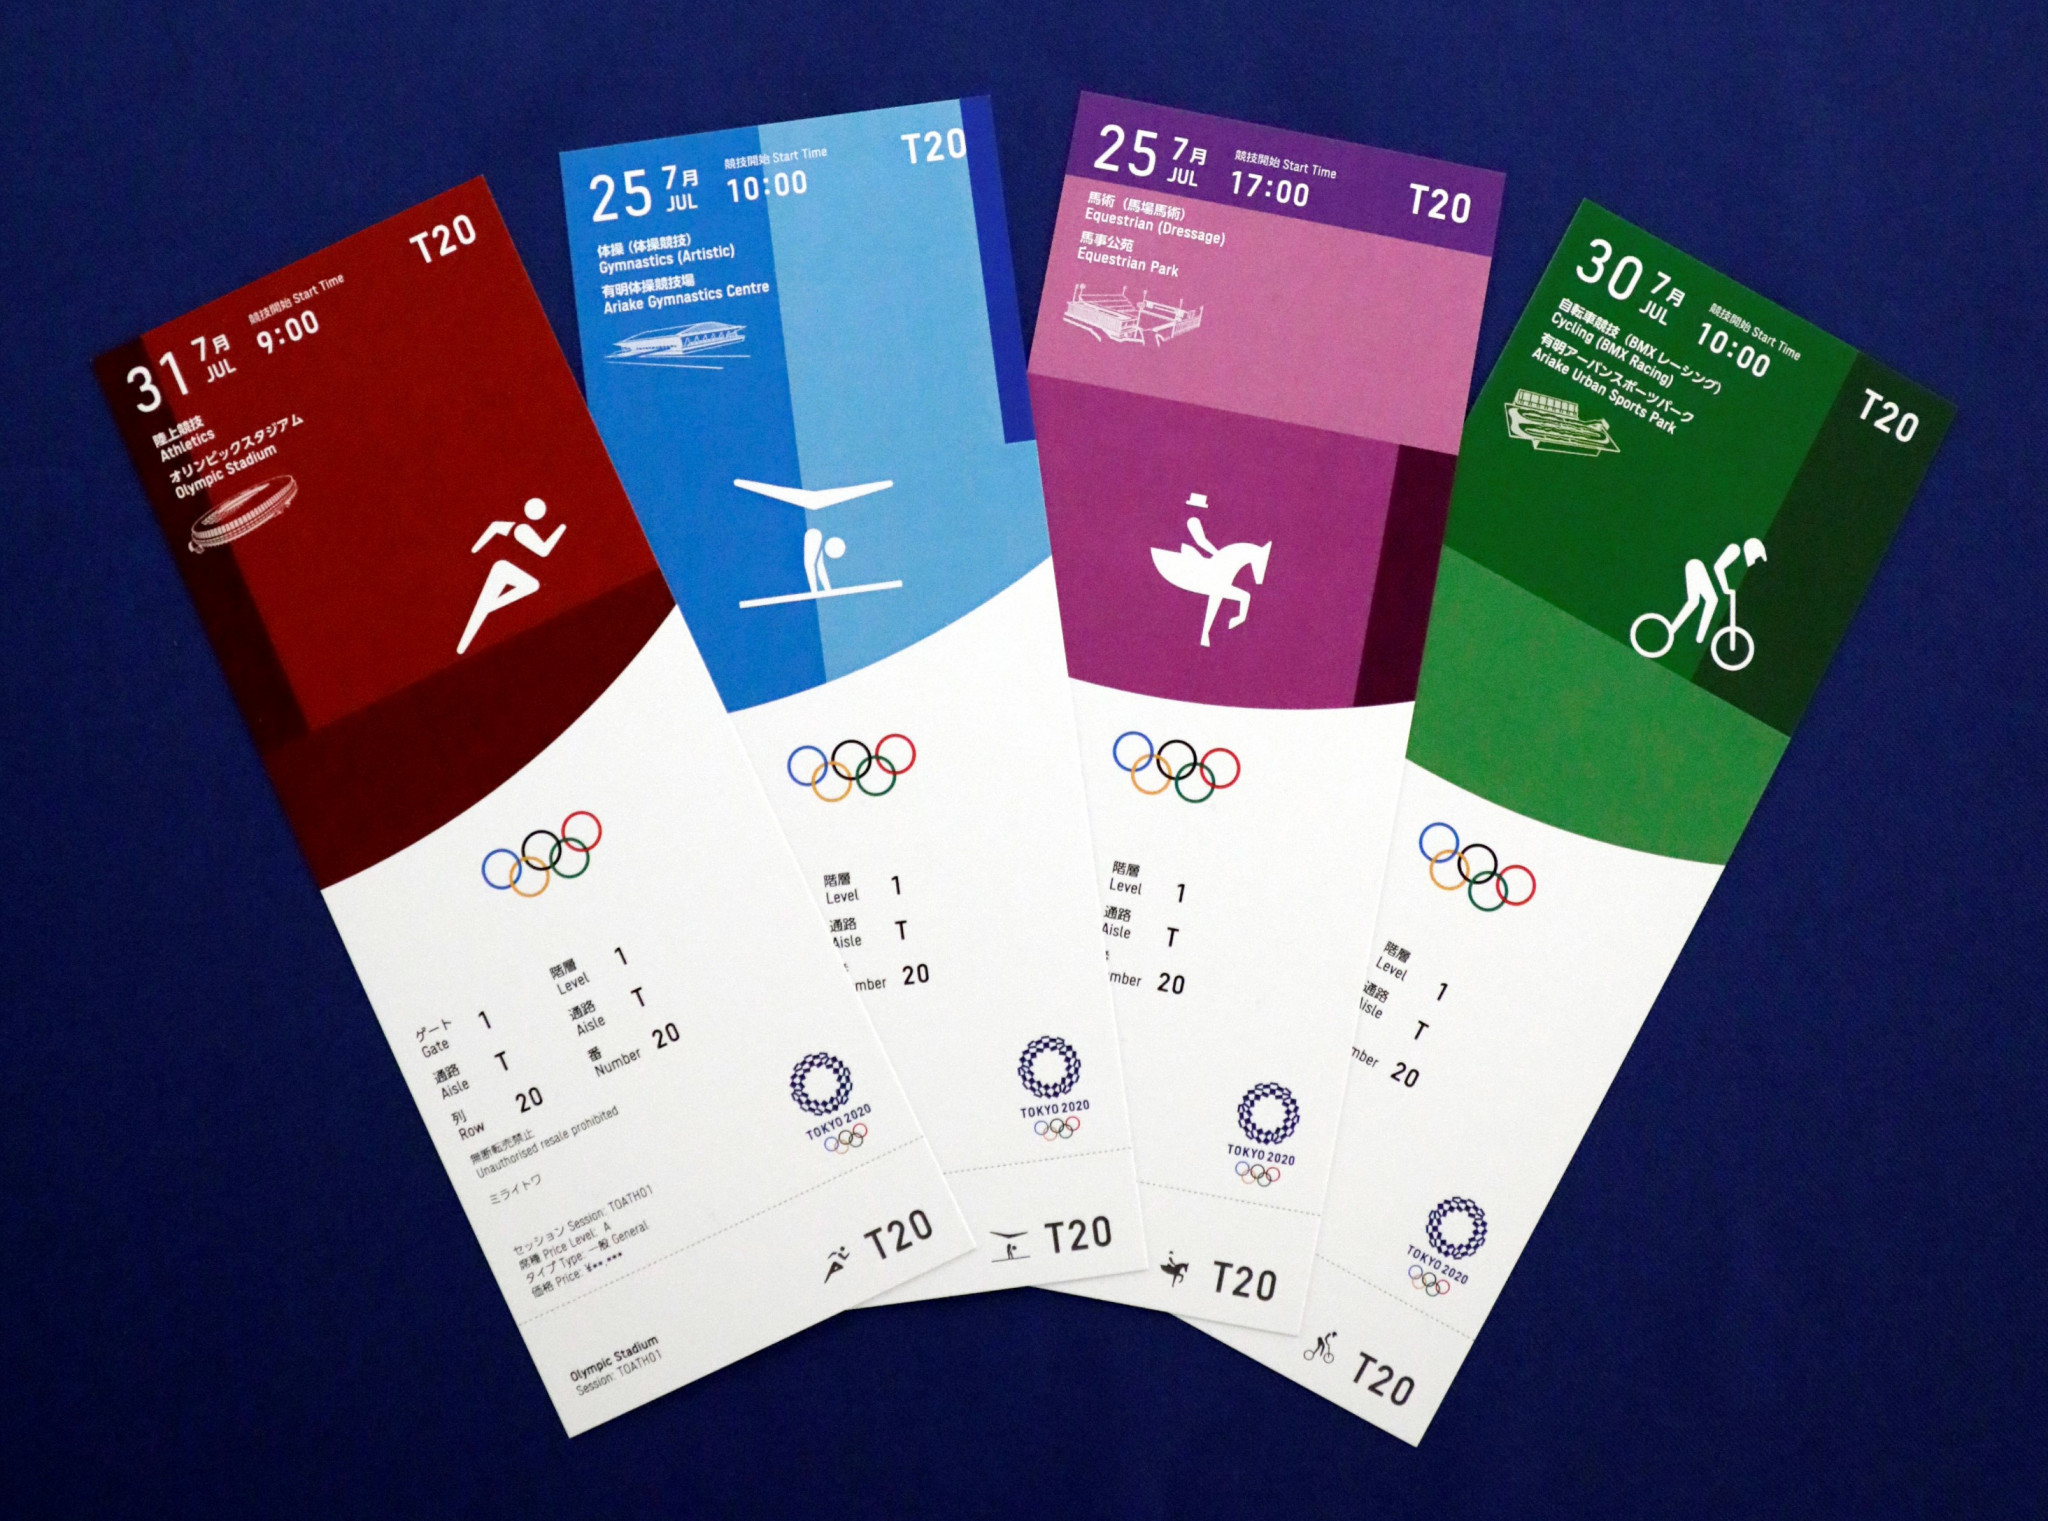 Tokyo 2020 begins refund process for Japanese Olympic ticketholders 